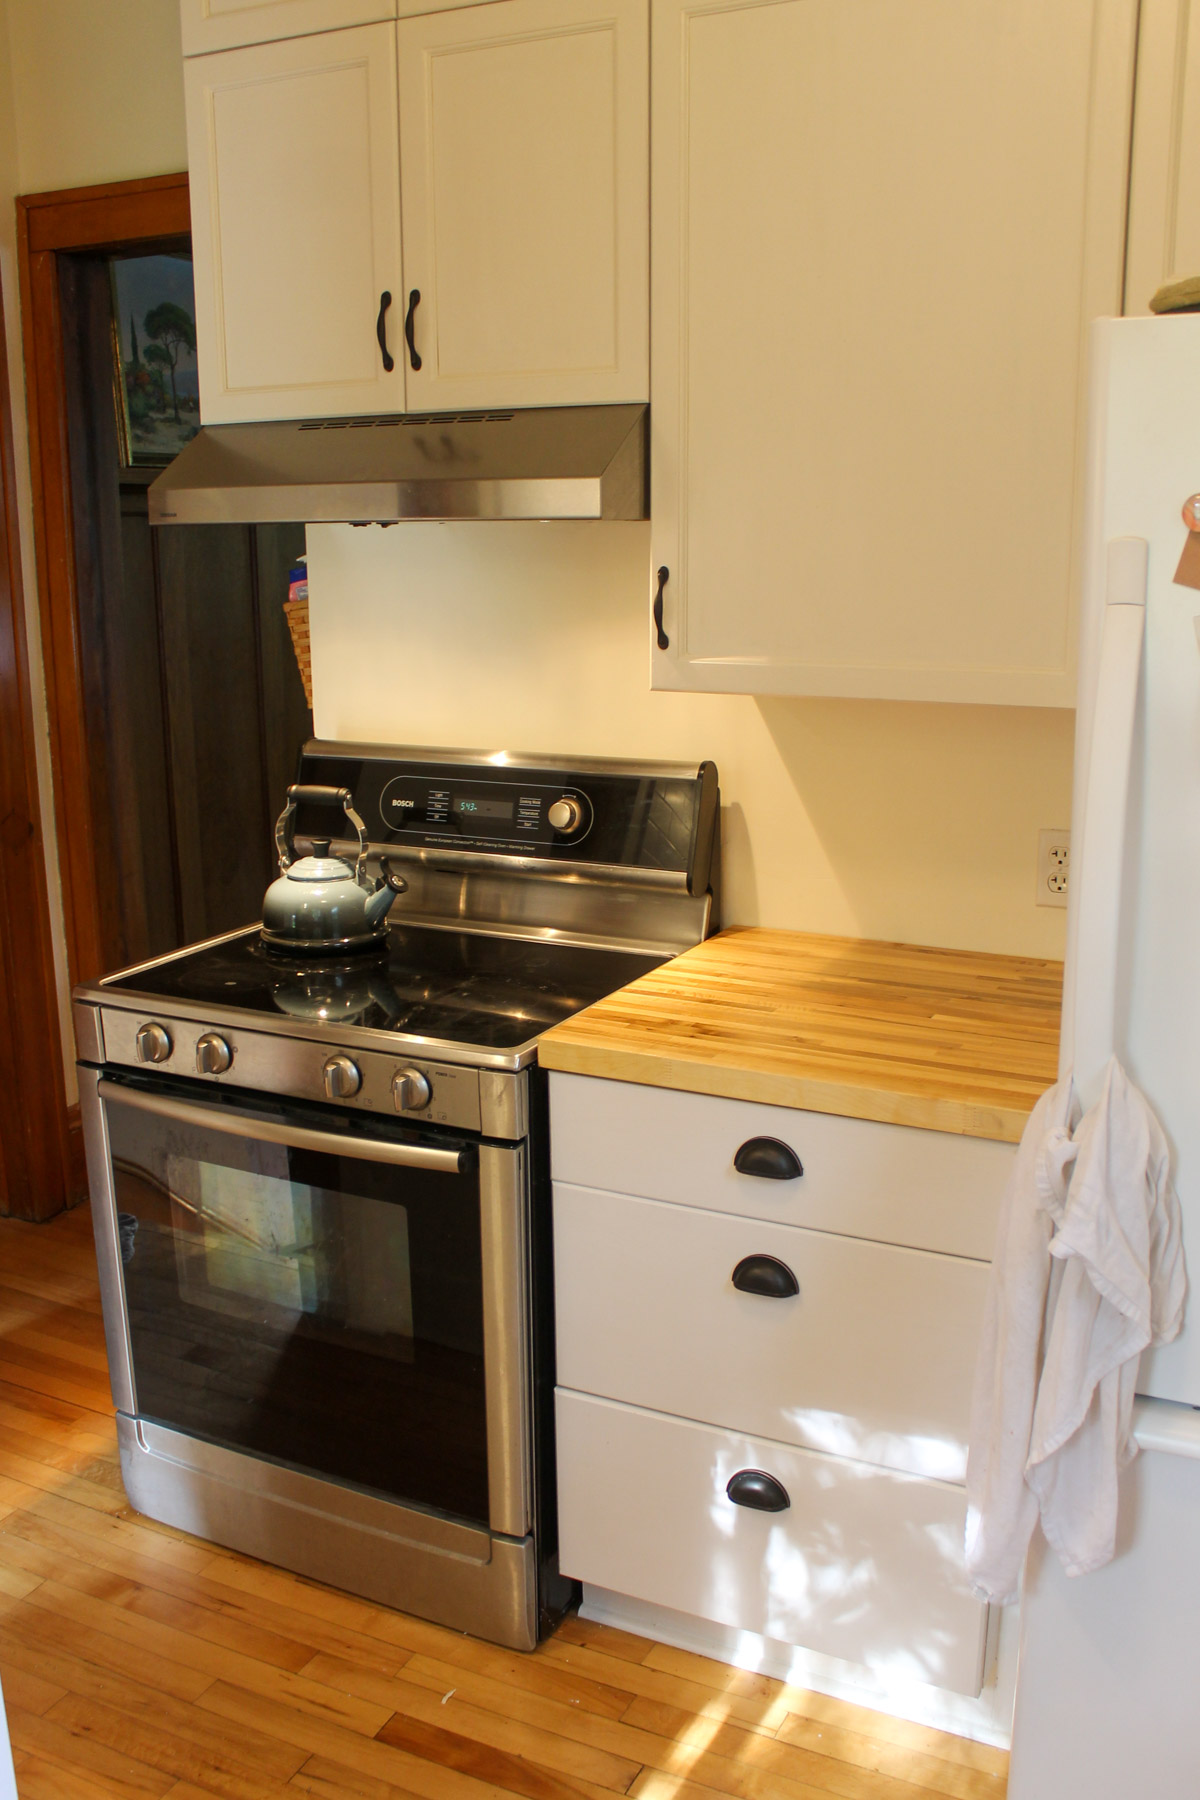 The updated kitchen with painted white cabinets, new black hardware and butcherblock counters.